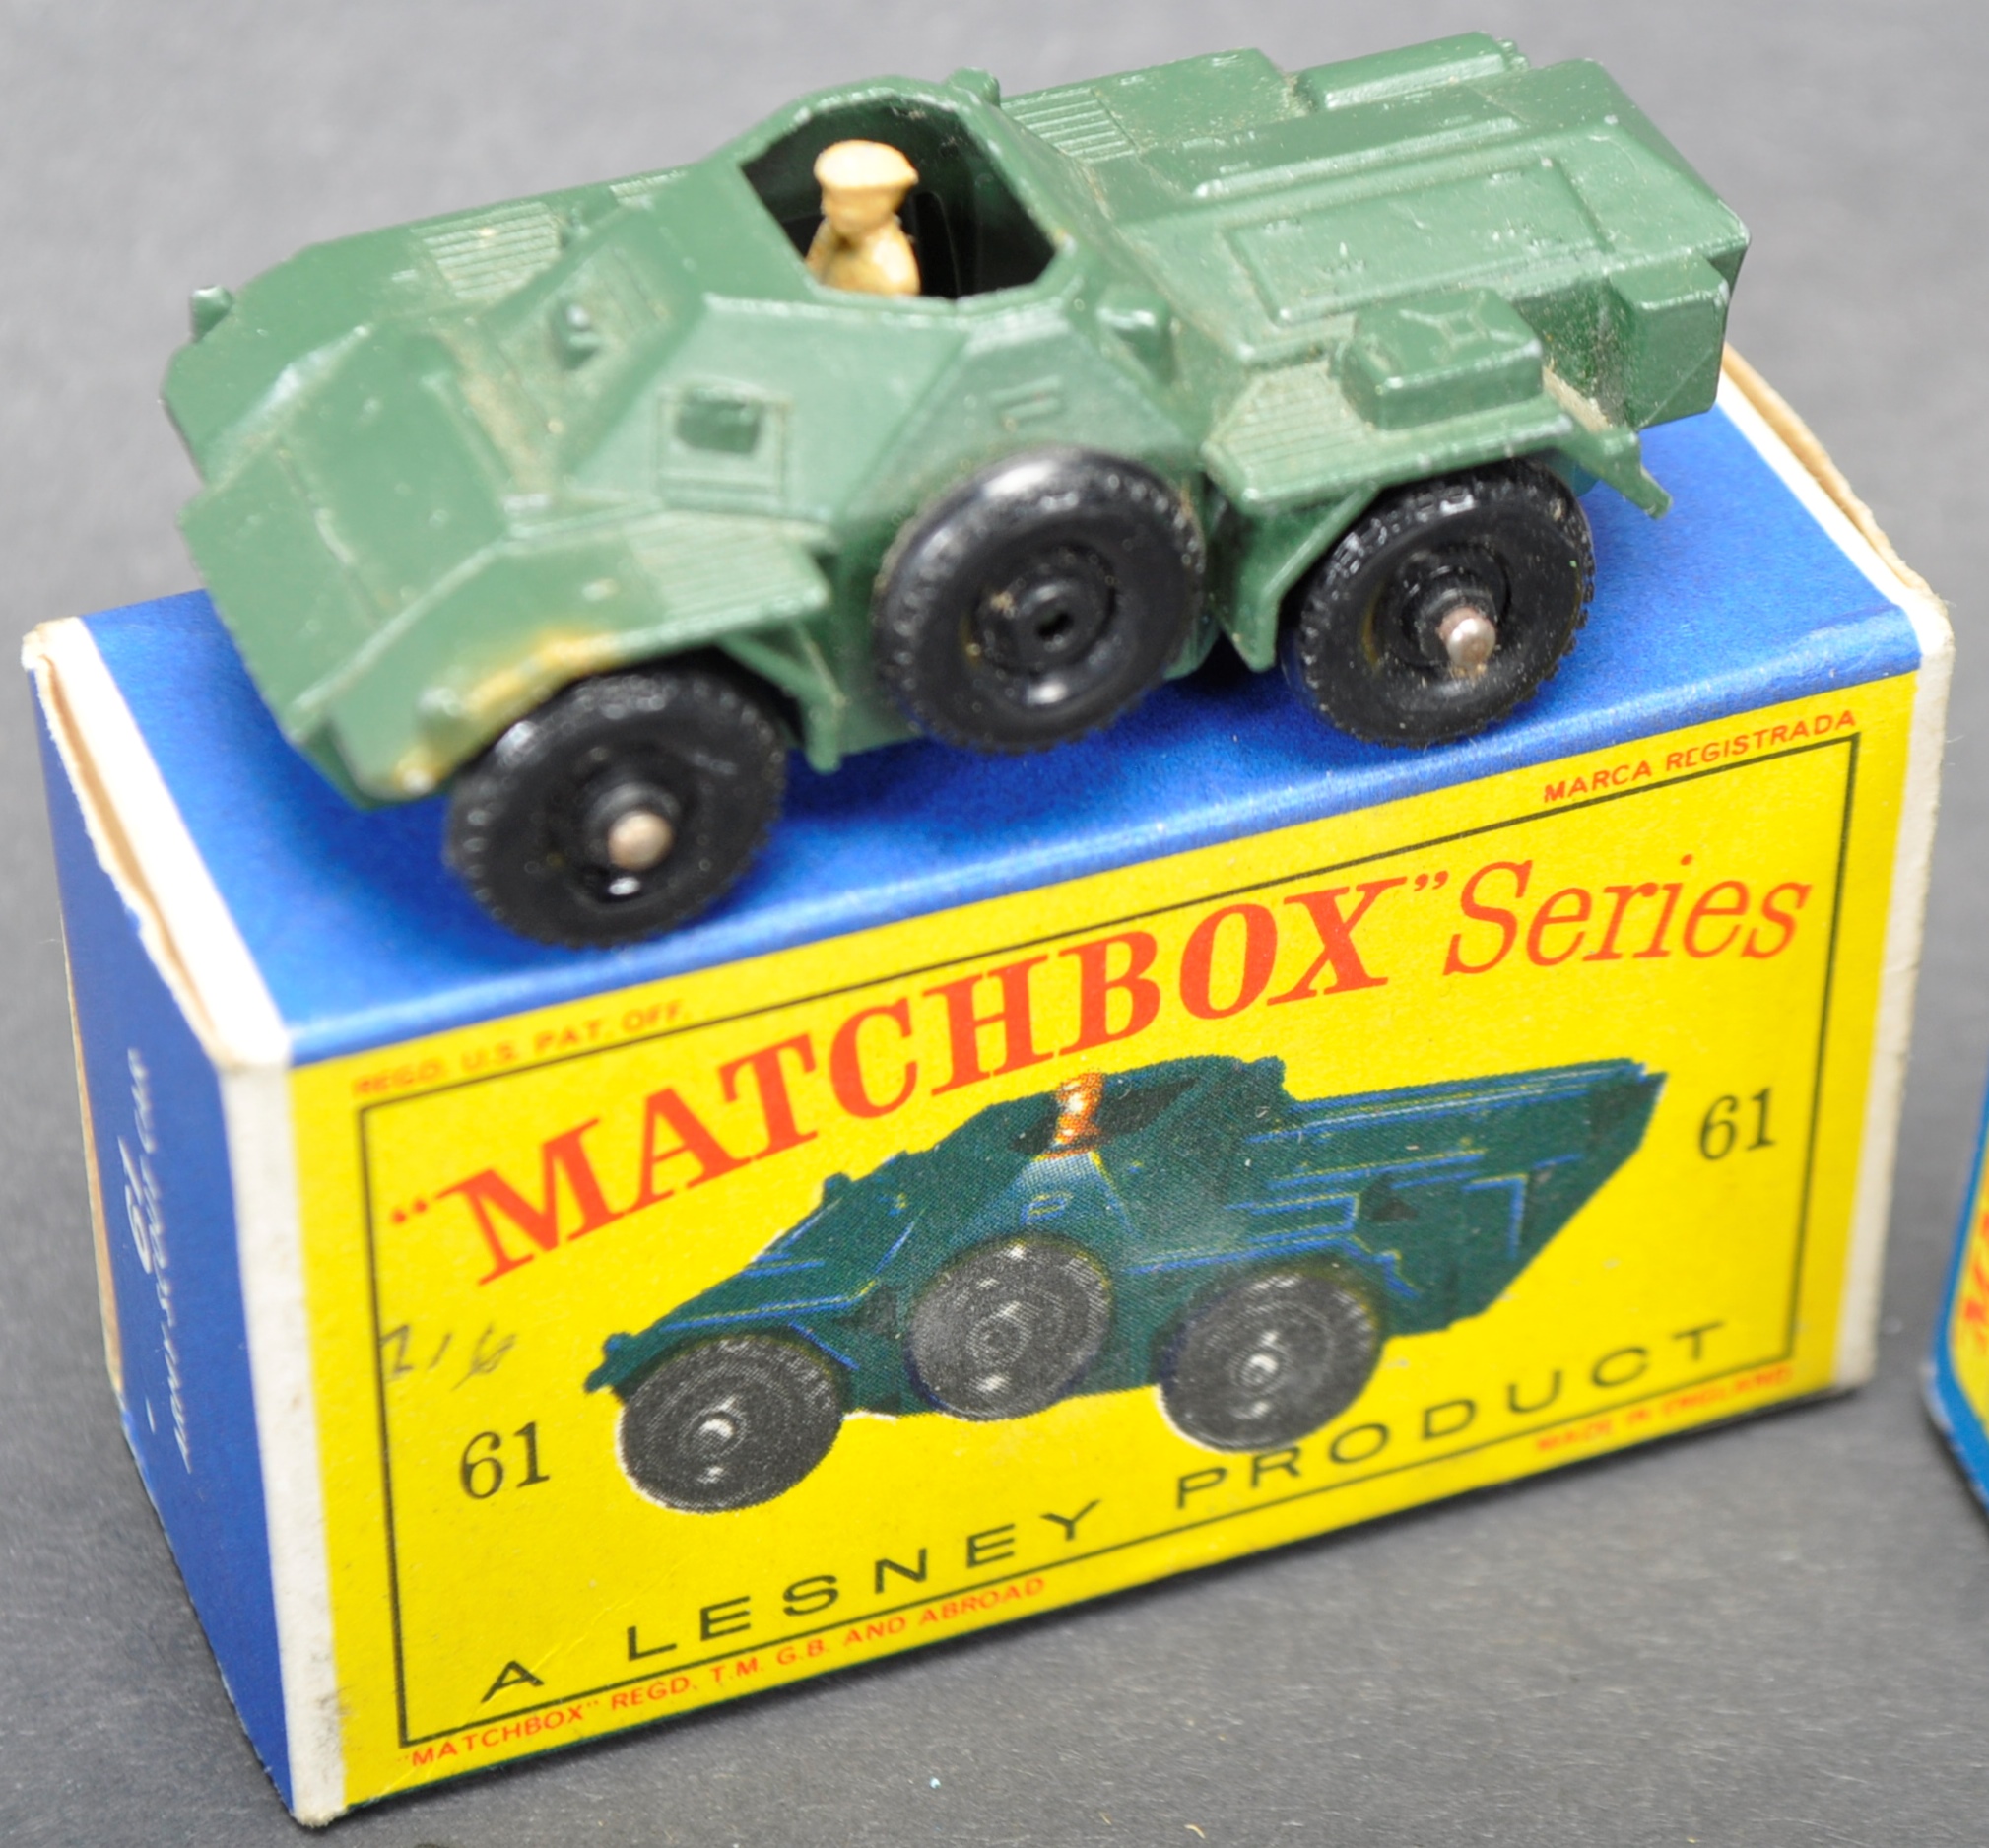 COLLECTION OF VINTAGE LESNEY MATCHBOX DIECAST - Image 2 of 5